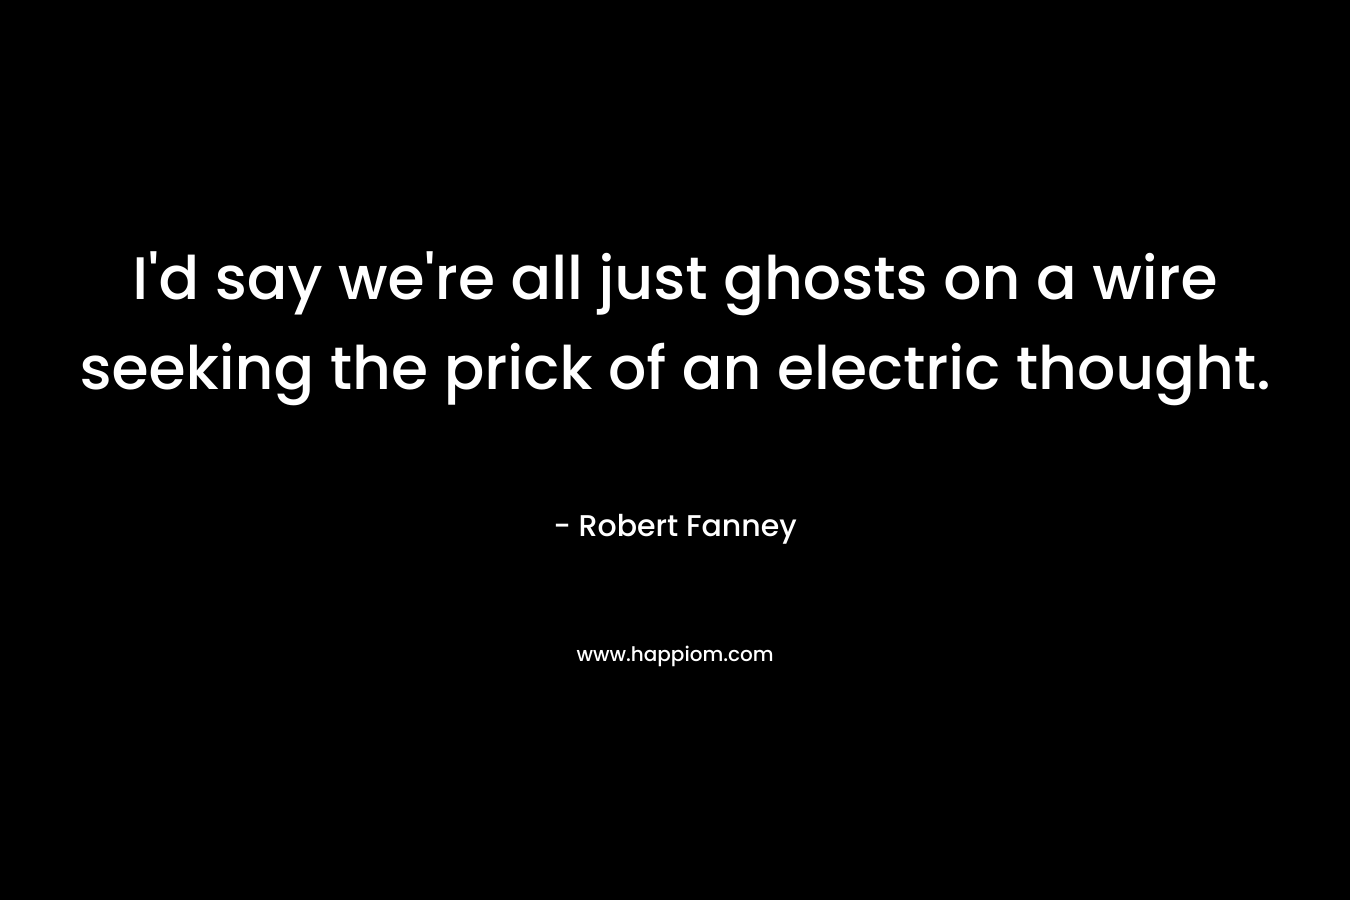 I’d say we’re all just ghosts on a wire seeking the prick of an electric thought. – Robert Fanney